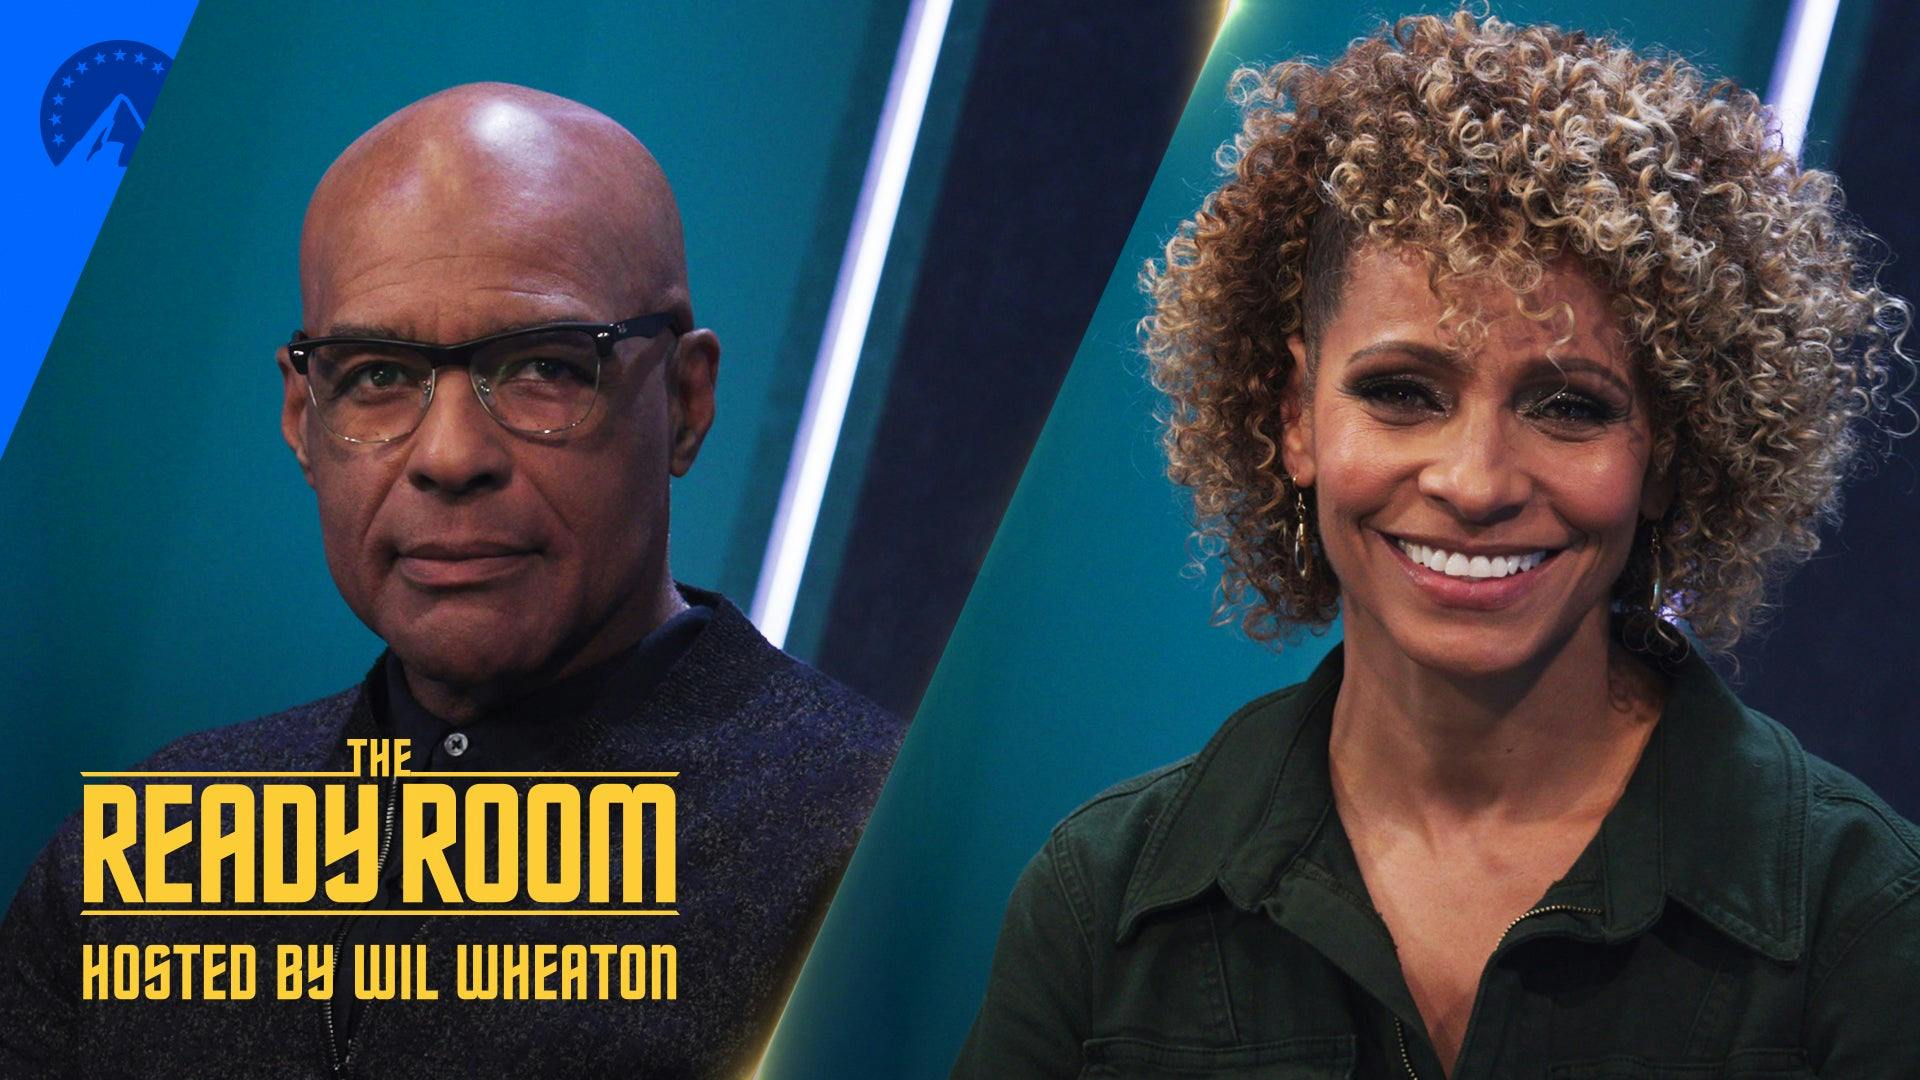 Split image of Michael Dorn and Michelle Hurd on The Ready Room